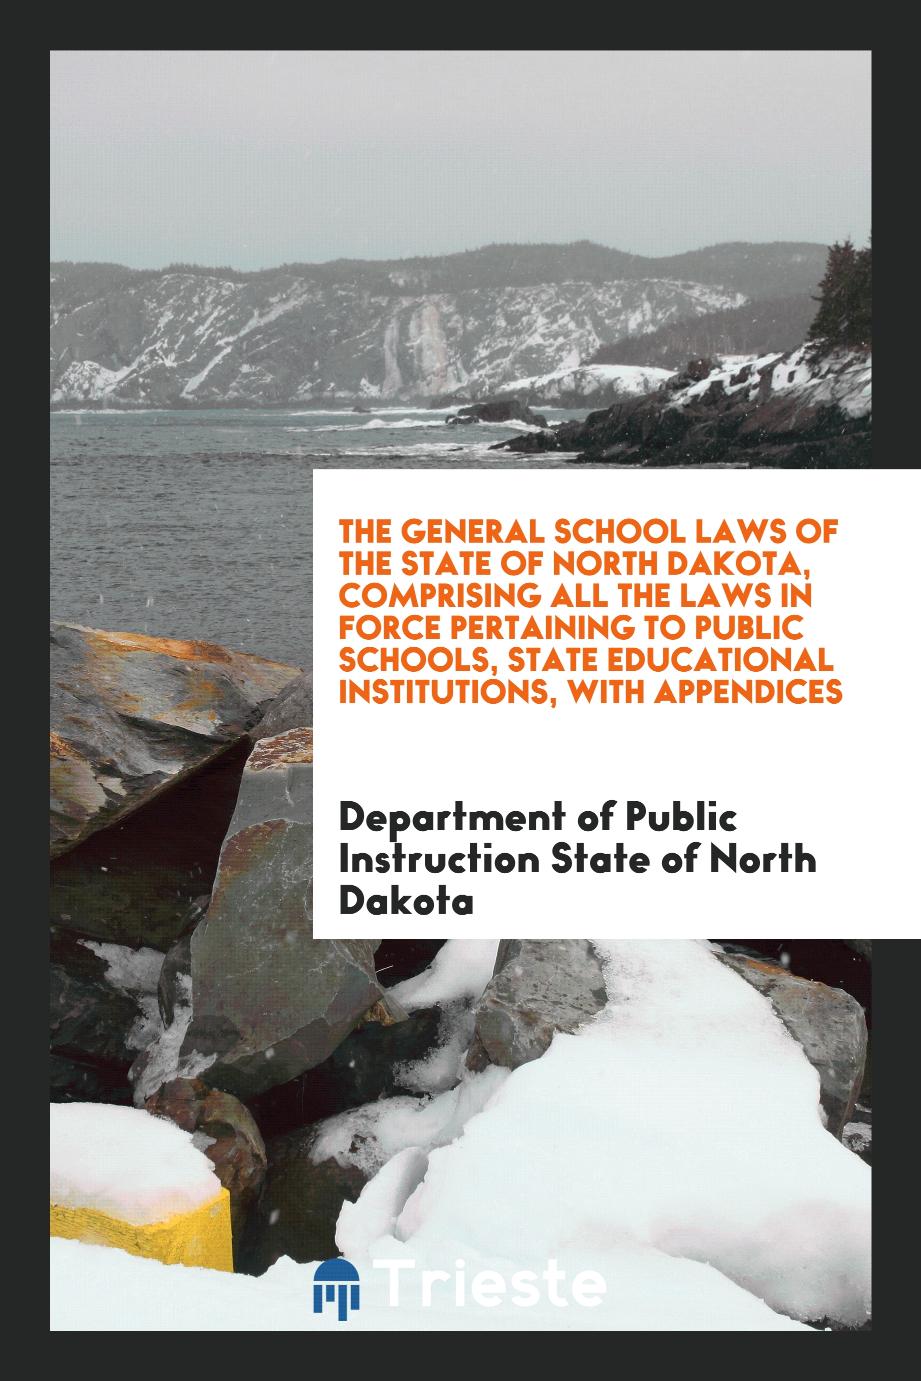 The General School Laws of the State of North Dakota, Comprising All the Laws in Force Pertaining to Public Schools, State Educational Institutions, with Appendices